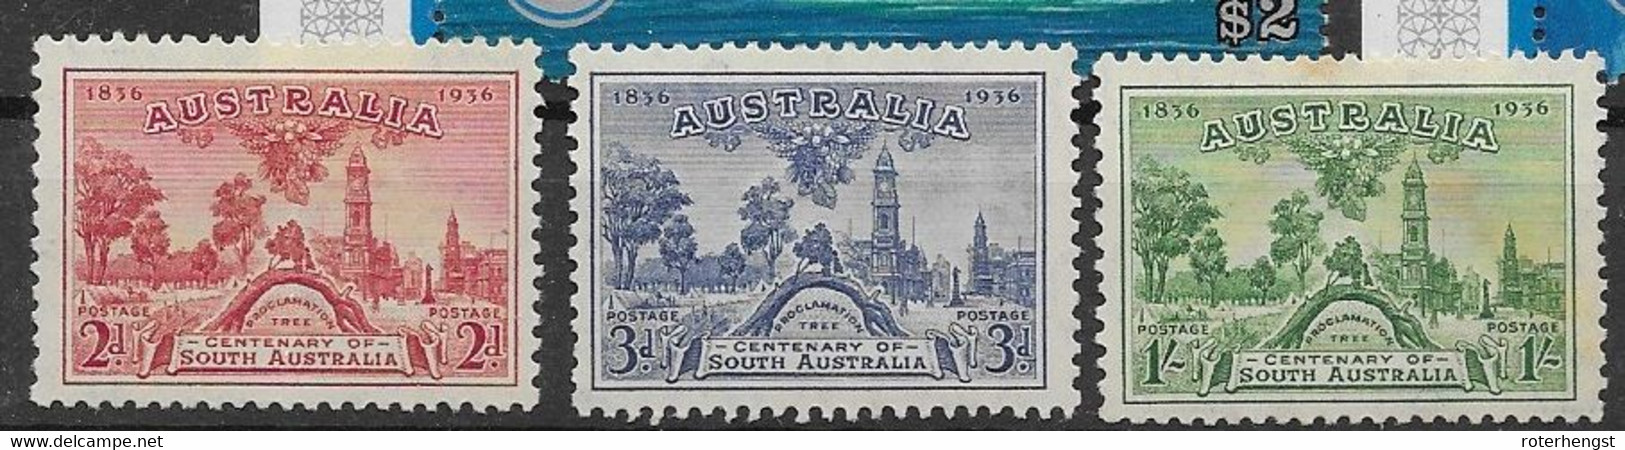 Australia Set Mh * But Green Stamp With Rust/stain Spots On Gum (25 Euros) 1936 - Neufs